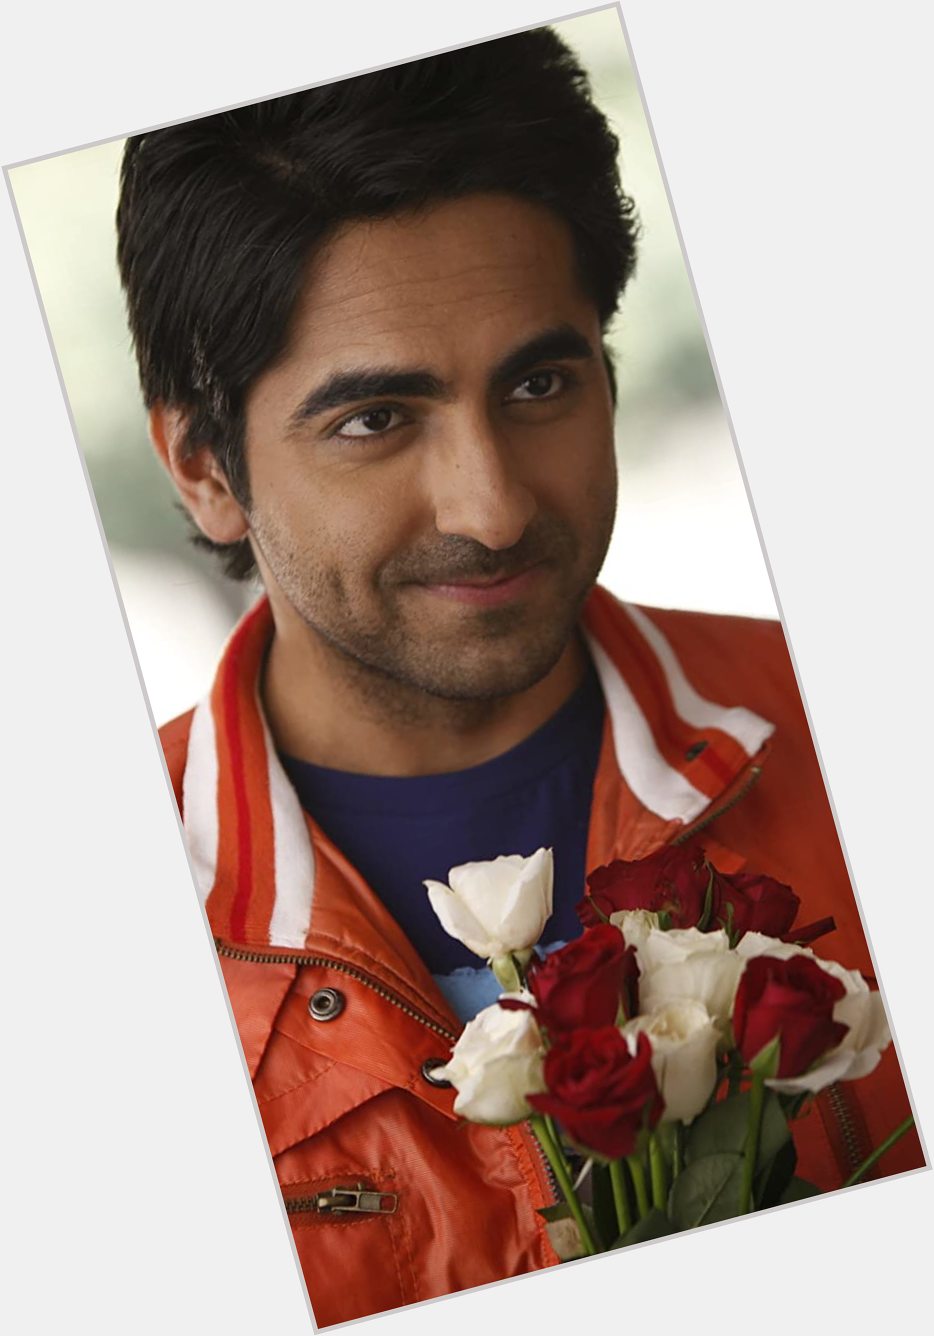 Happy Birthday to versatile actor Ayushmann Khurrana, big fan of your movie\s & voice as well! 